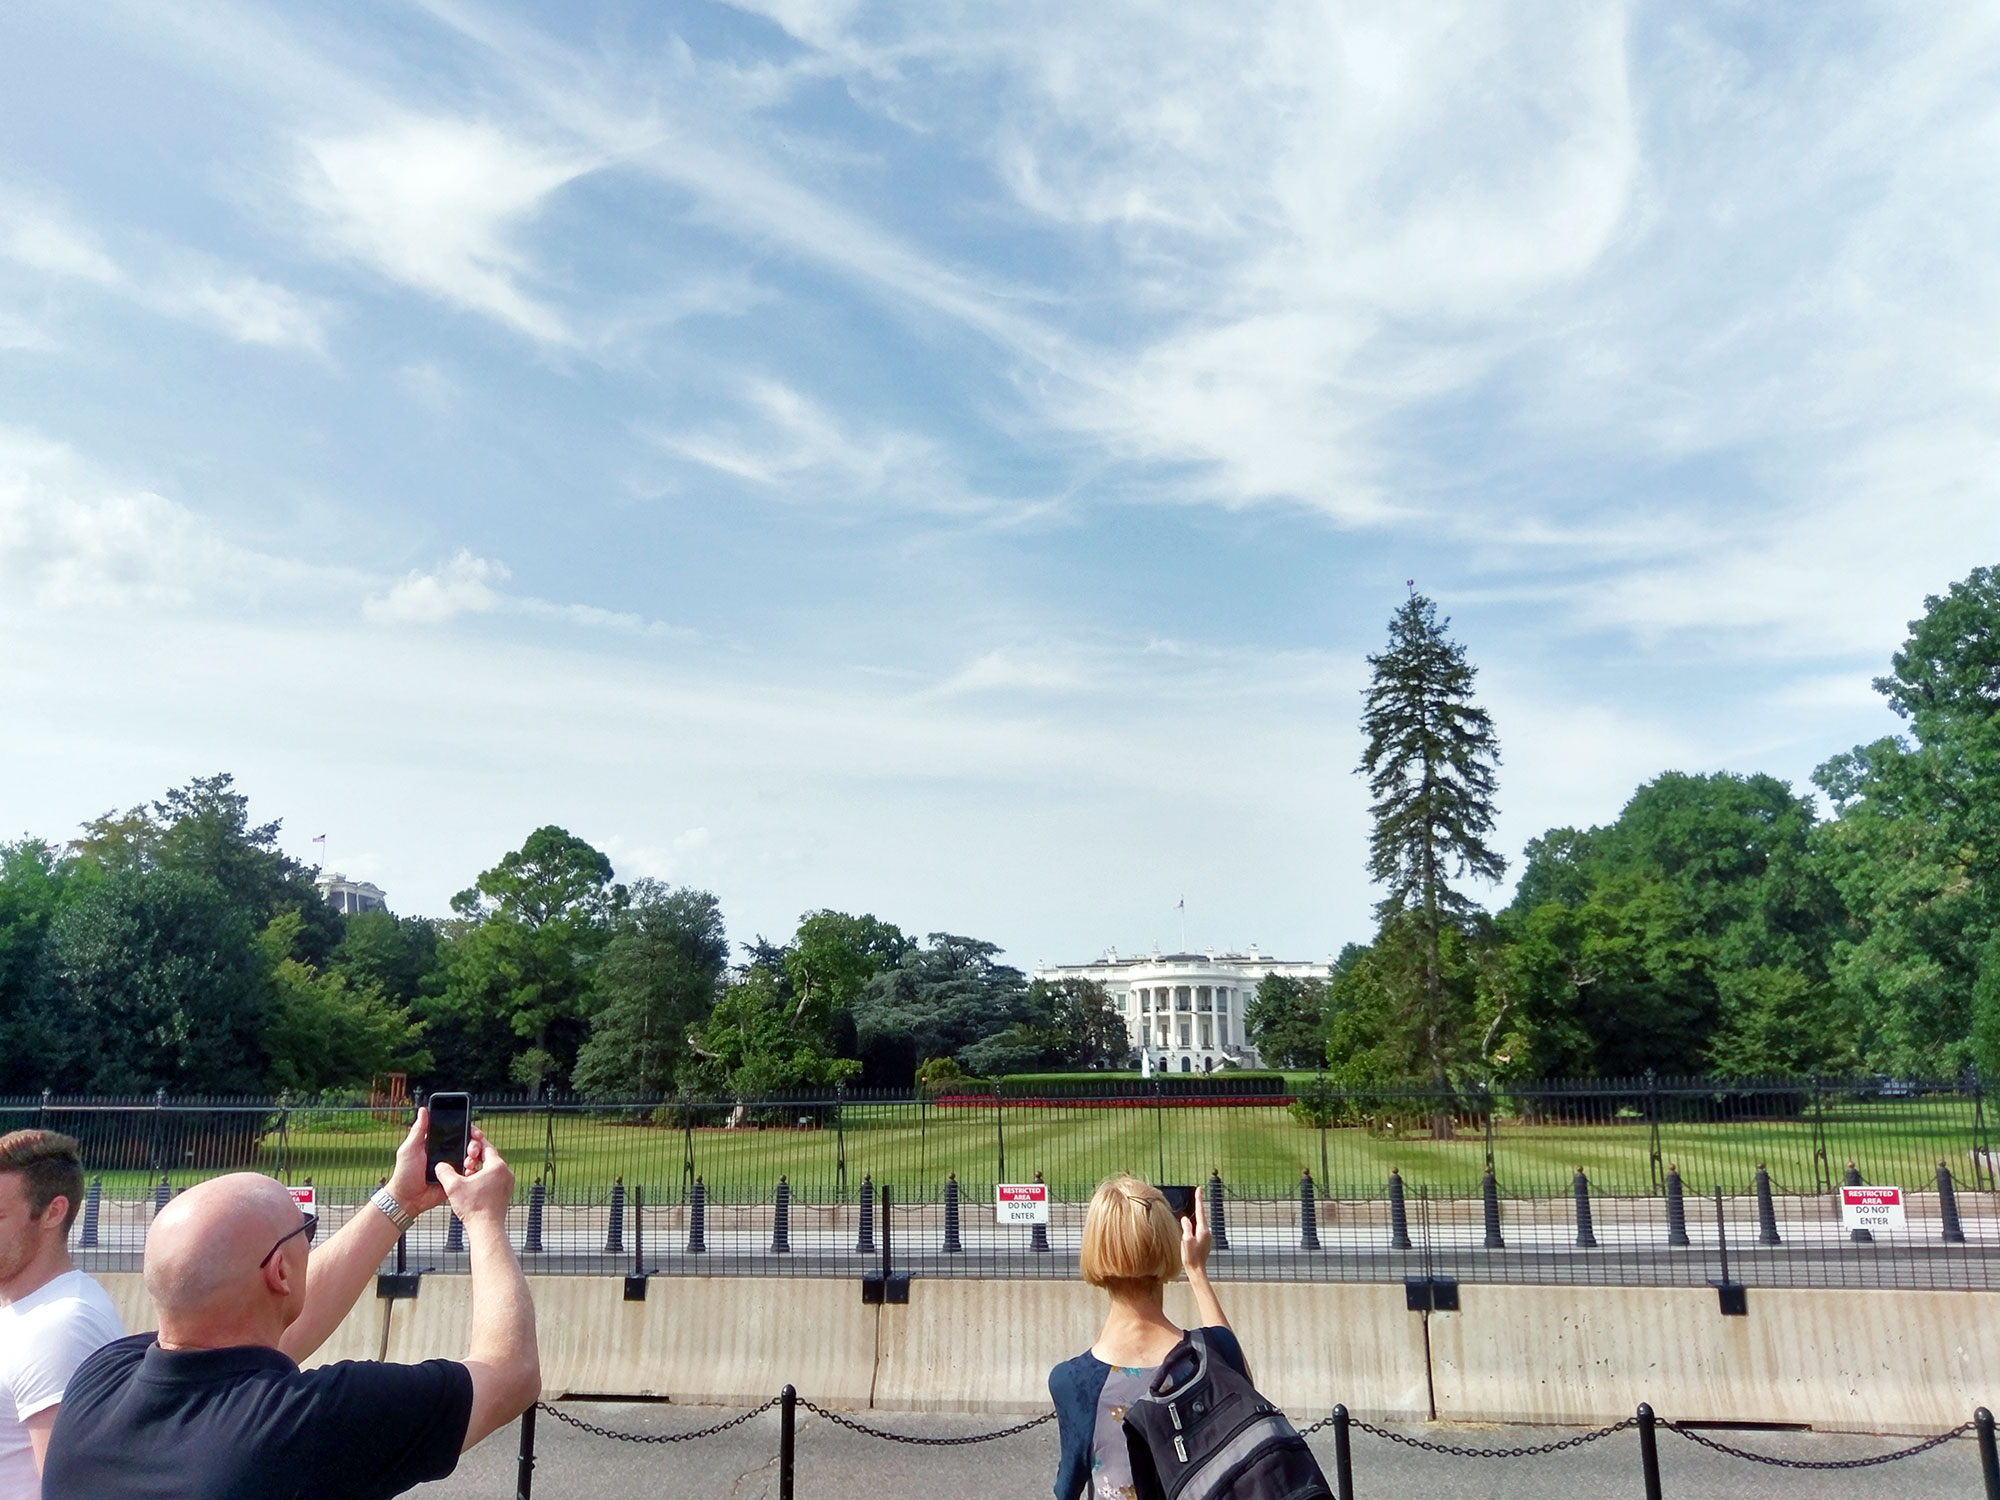 Tourists taking pictures of the White House in Washington D.C.